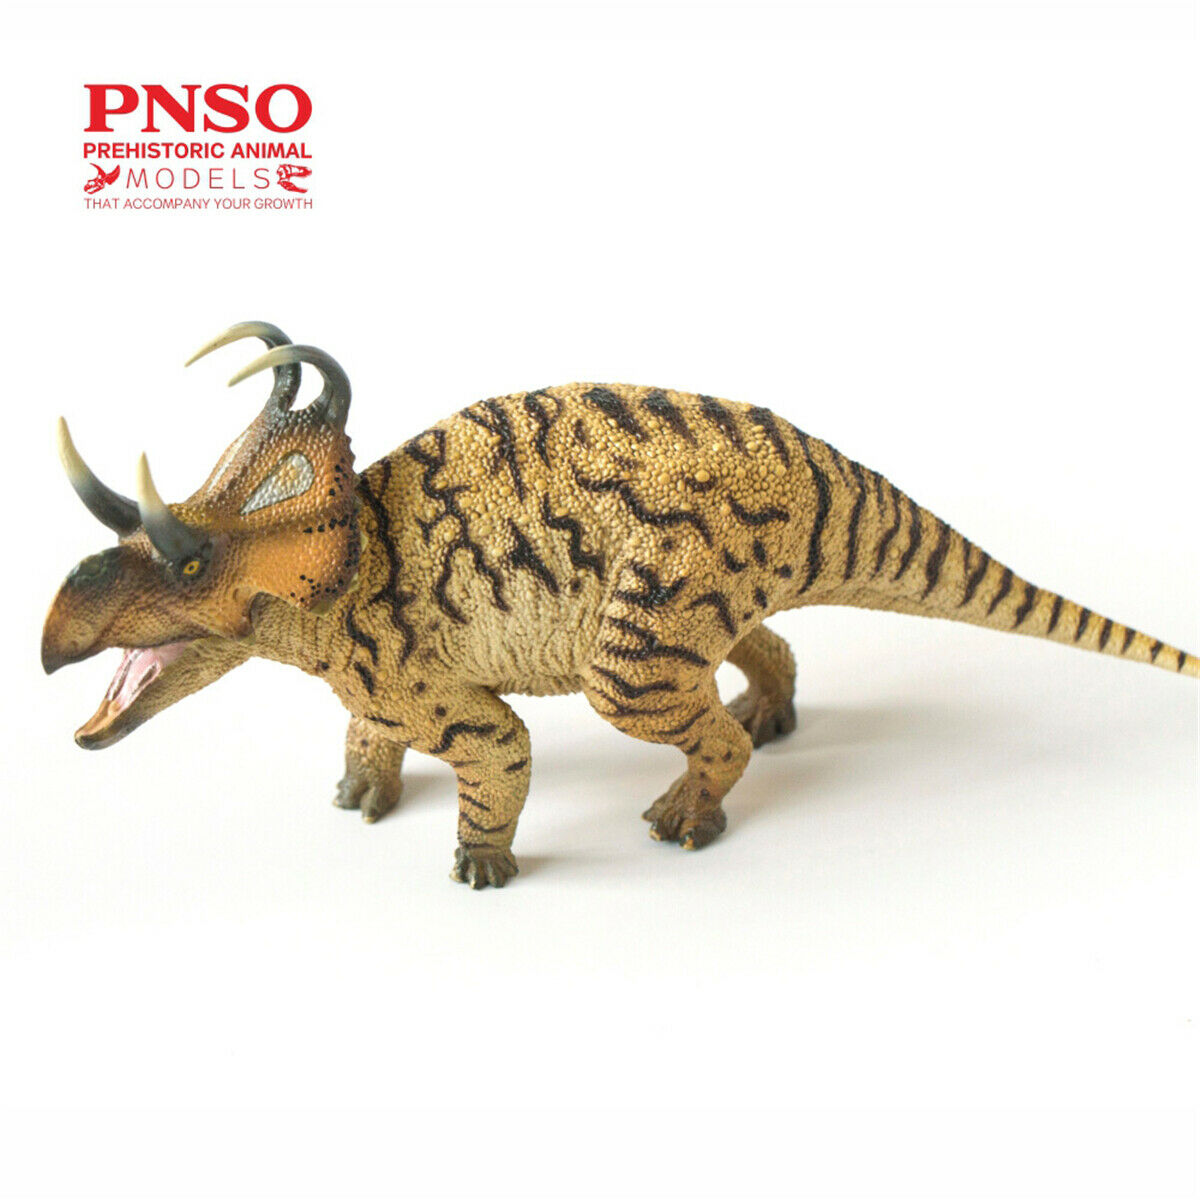 New Release  Jacques the Deinocheirus Scientific Art Model from PNSO  Prehistoric Animal Models Series – PNSO